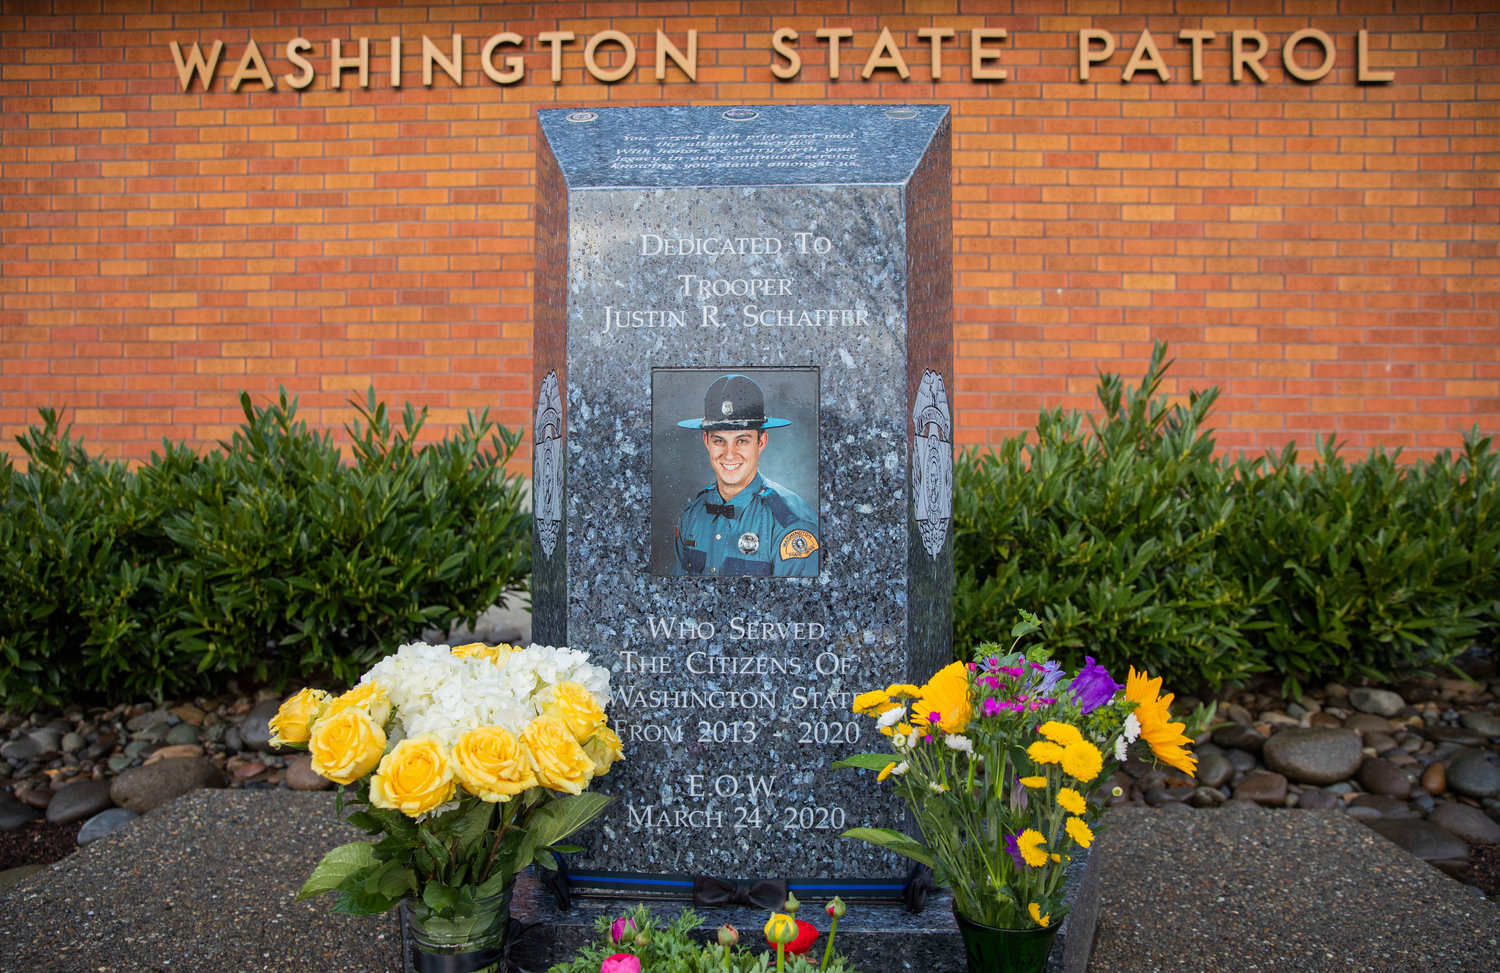 Flowers are arranged around a memorial for Trooper Justin Schaffer Friday morning at the Chehalis Washington State Patrol office.